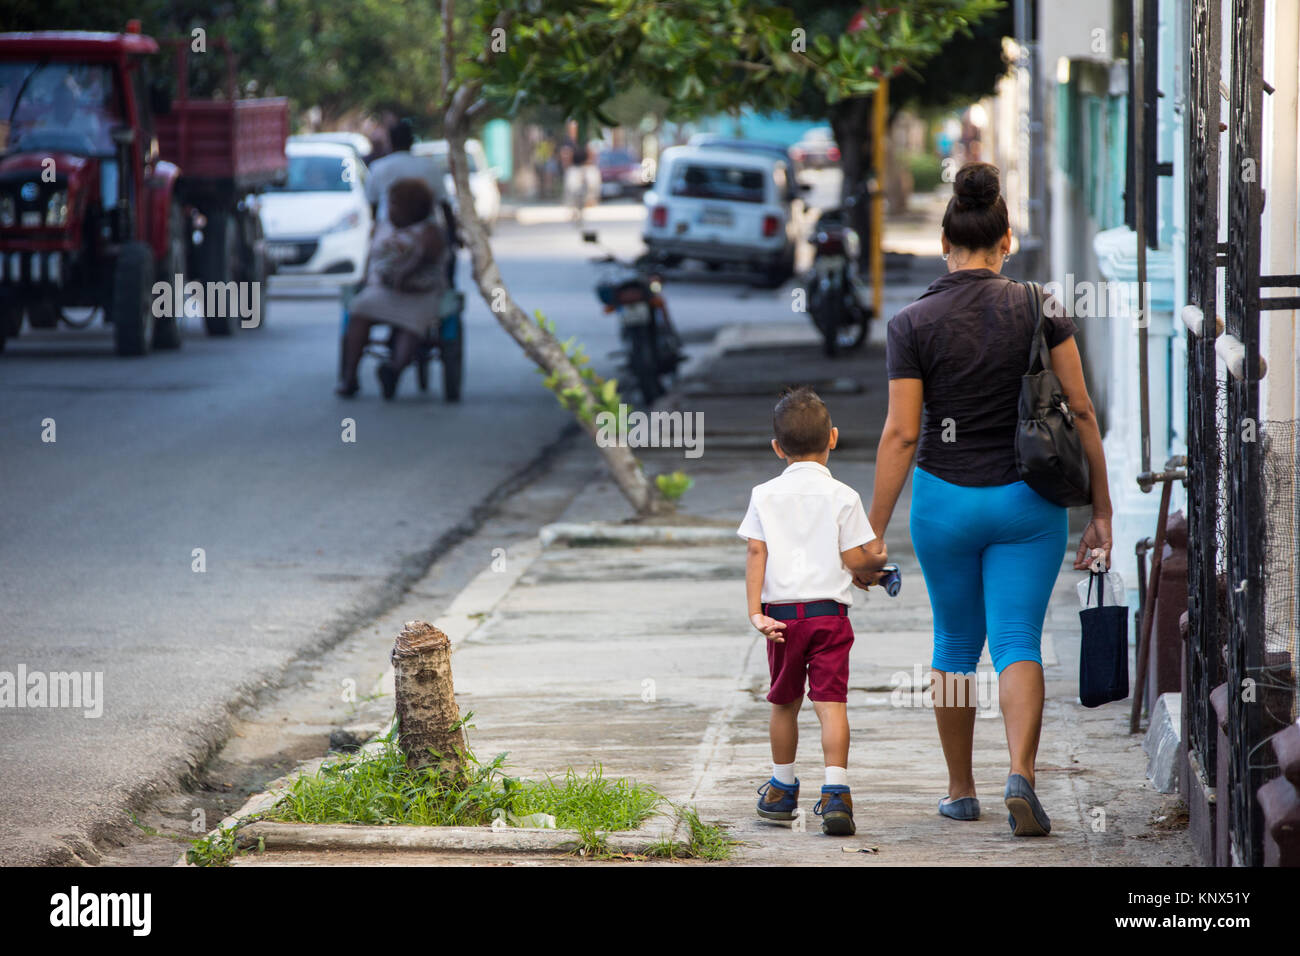 Local boy walking on the sidewalk with his mother, Cienfuegos, Cuba Stock Photo